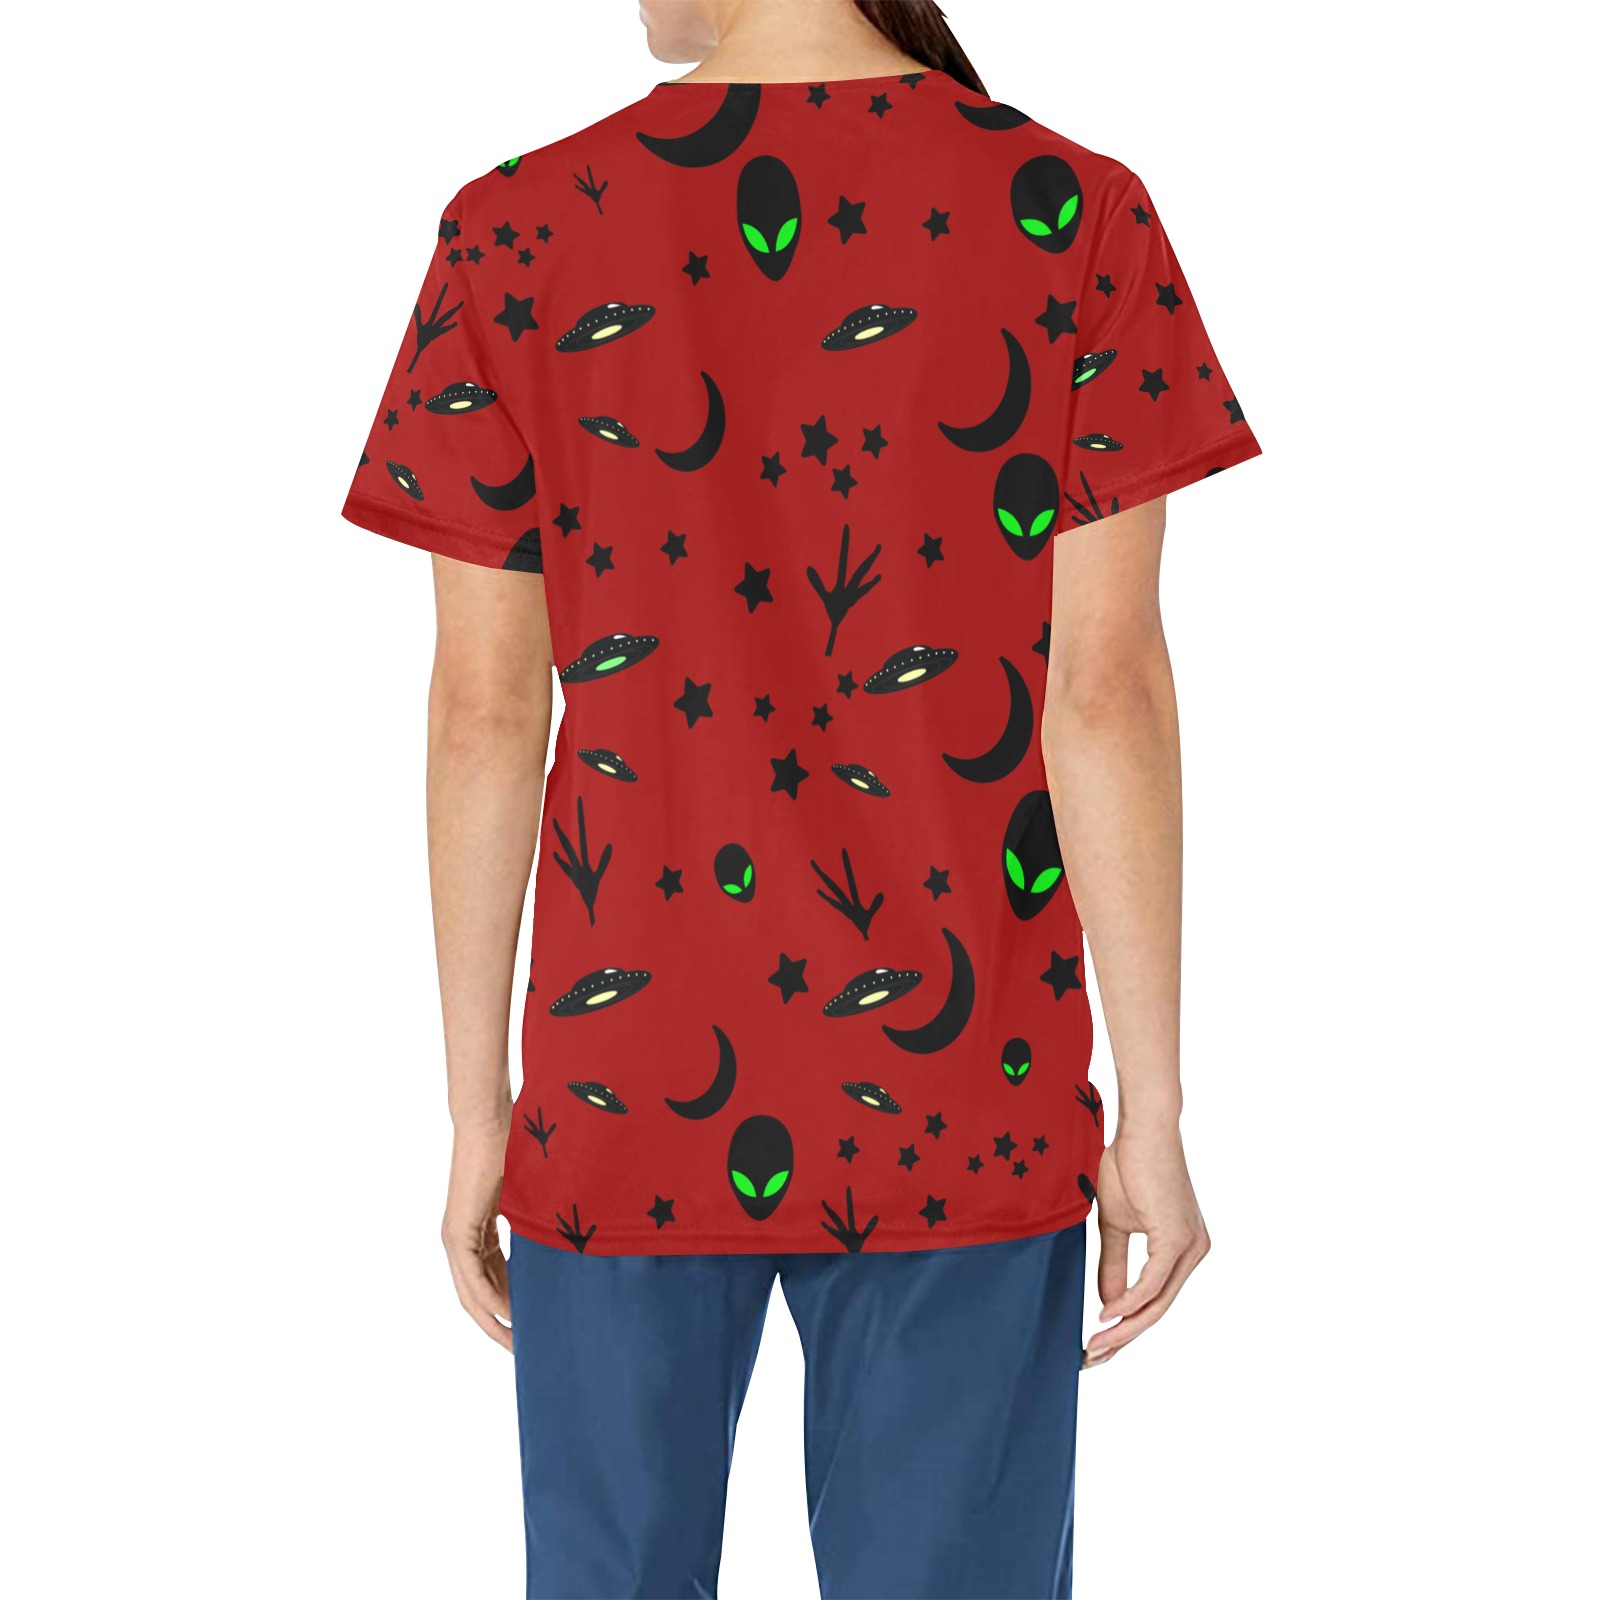 Aliens and Spaceships - Red All Over Print Scrub Top